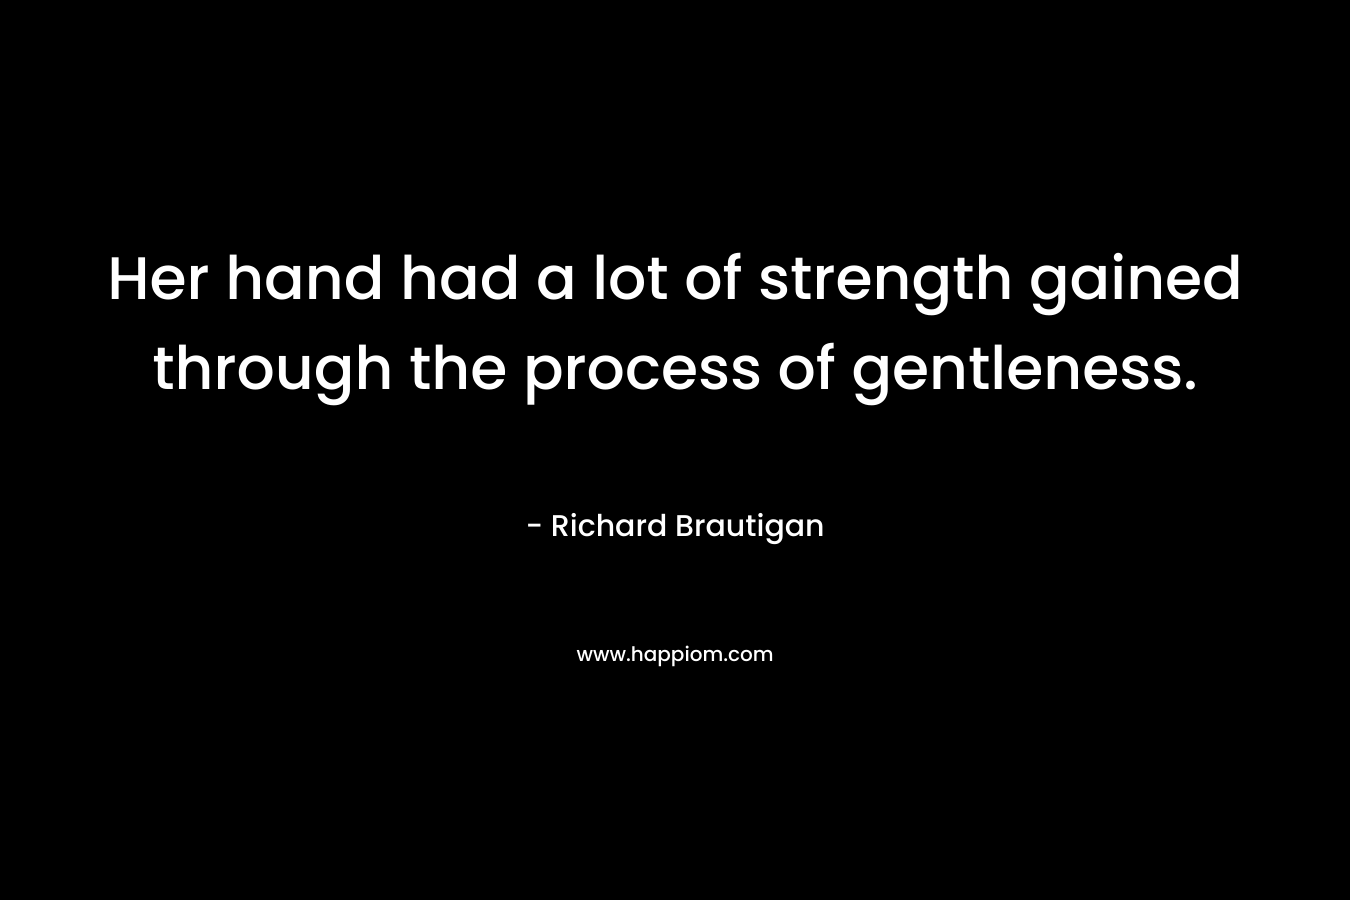 Her hand had a lot of strength gained through the process of gentleness. – Richard Brautigan